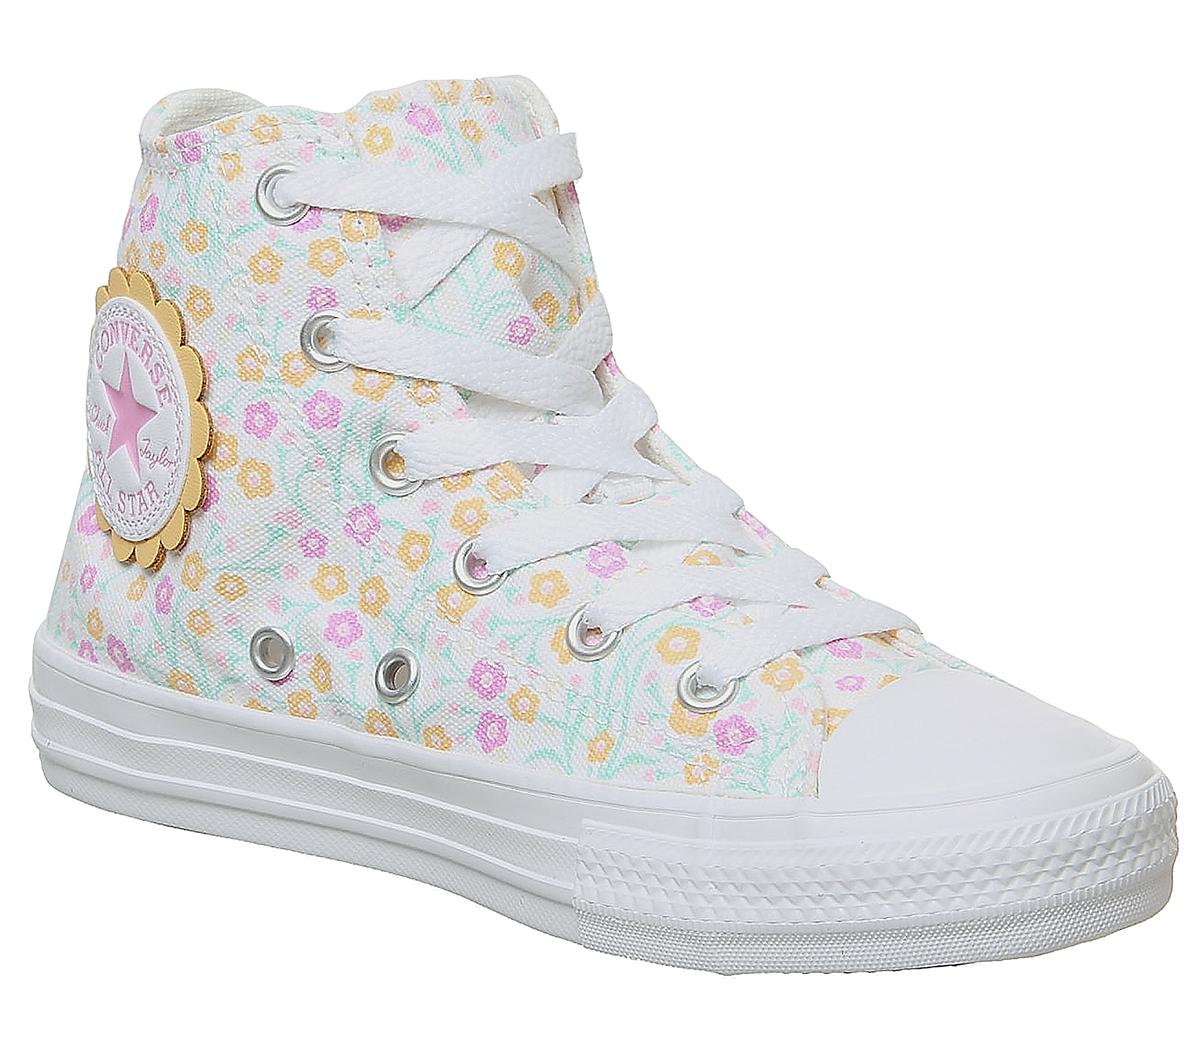 ConverseAll Star Hi Mid SizesWhite Topaz Gold Peony Pink Floral